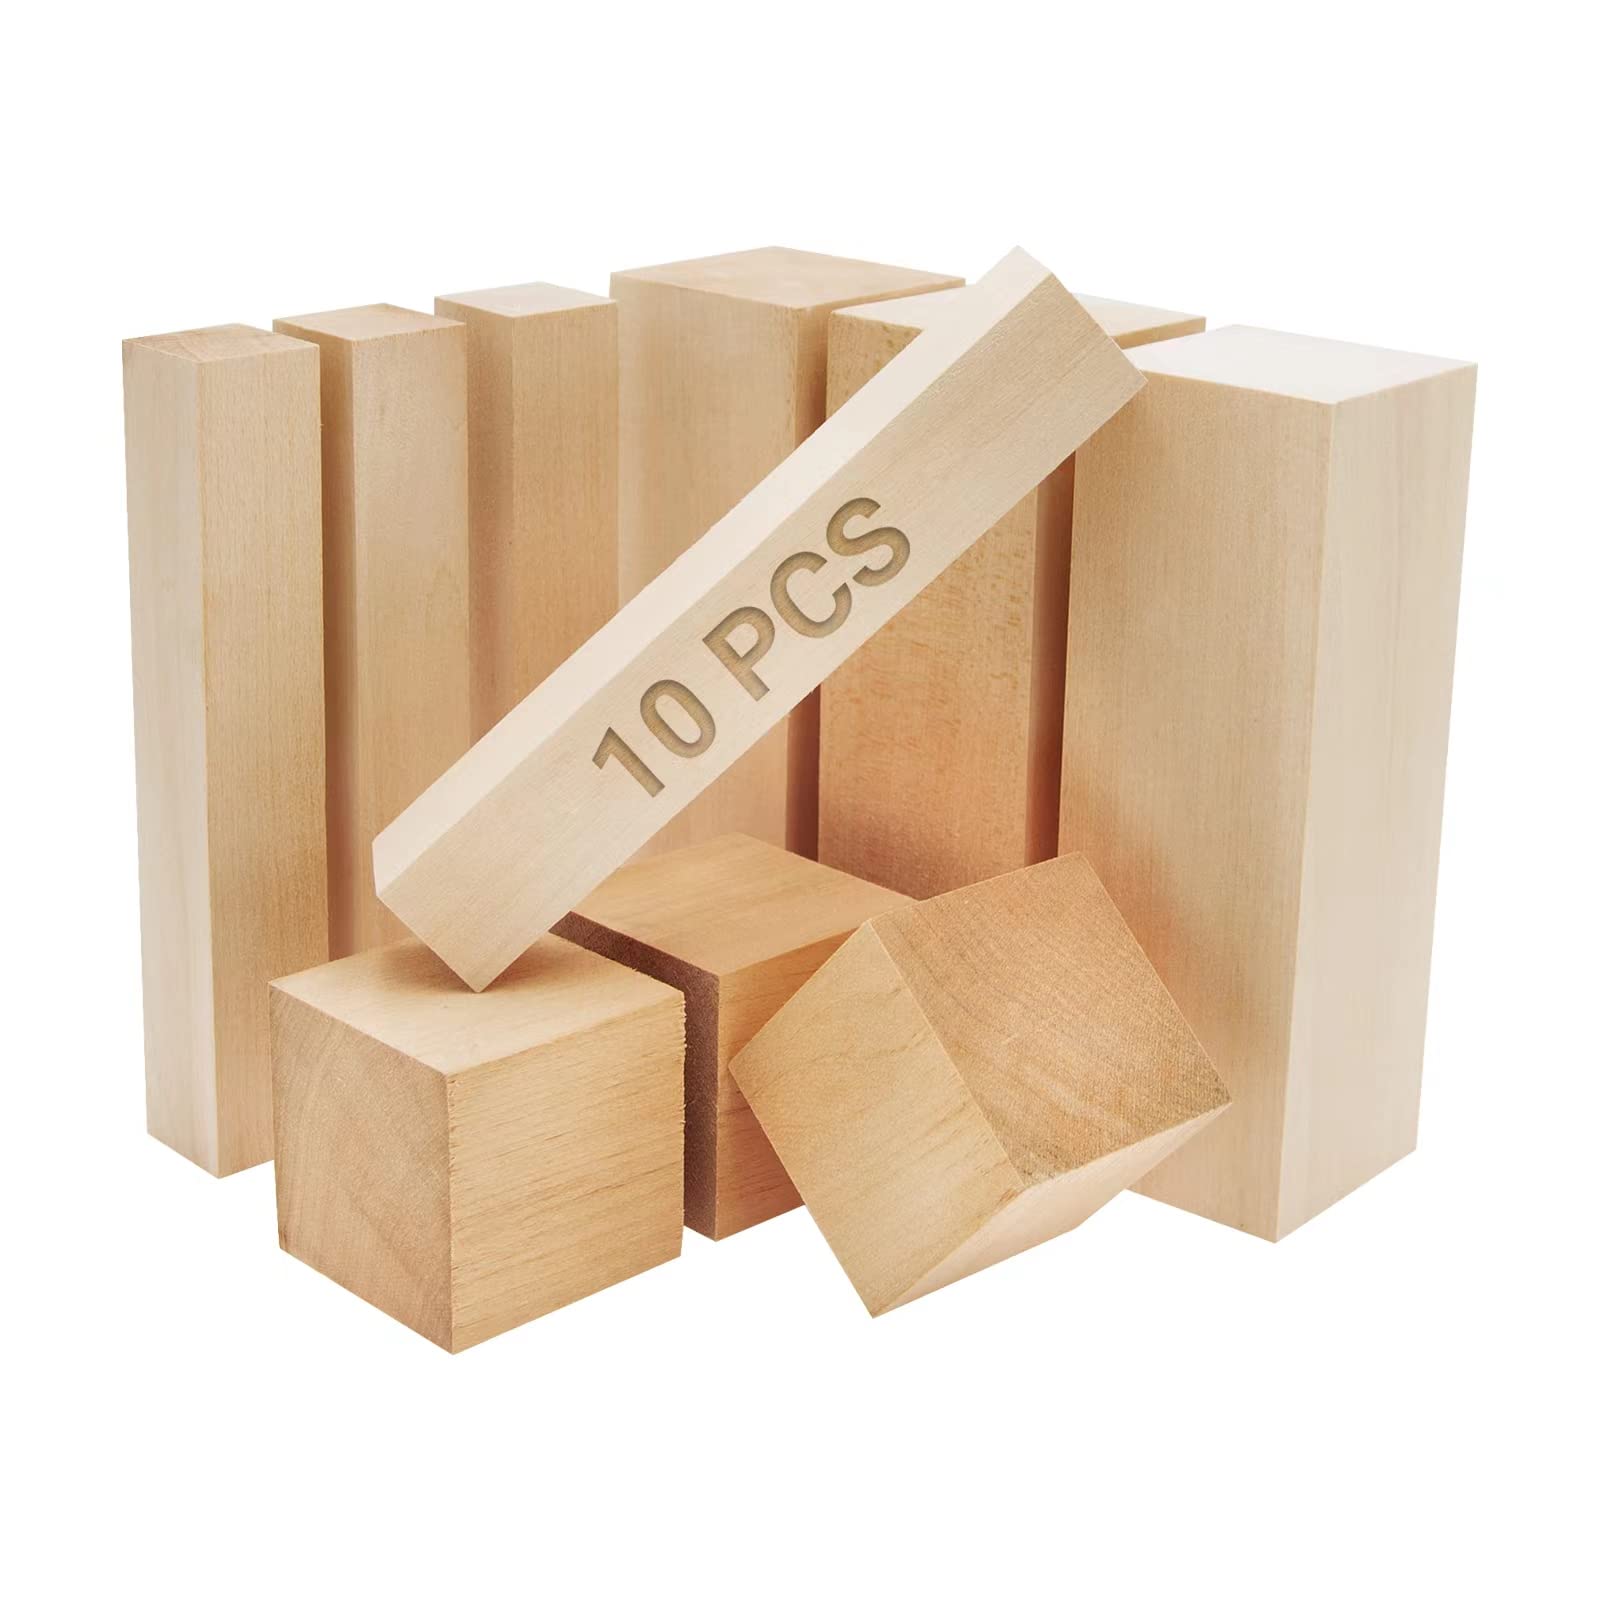 10 Pcs Large Unfinished Basswood Carving Blocks Fits Wood Carving